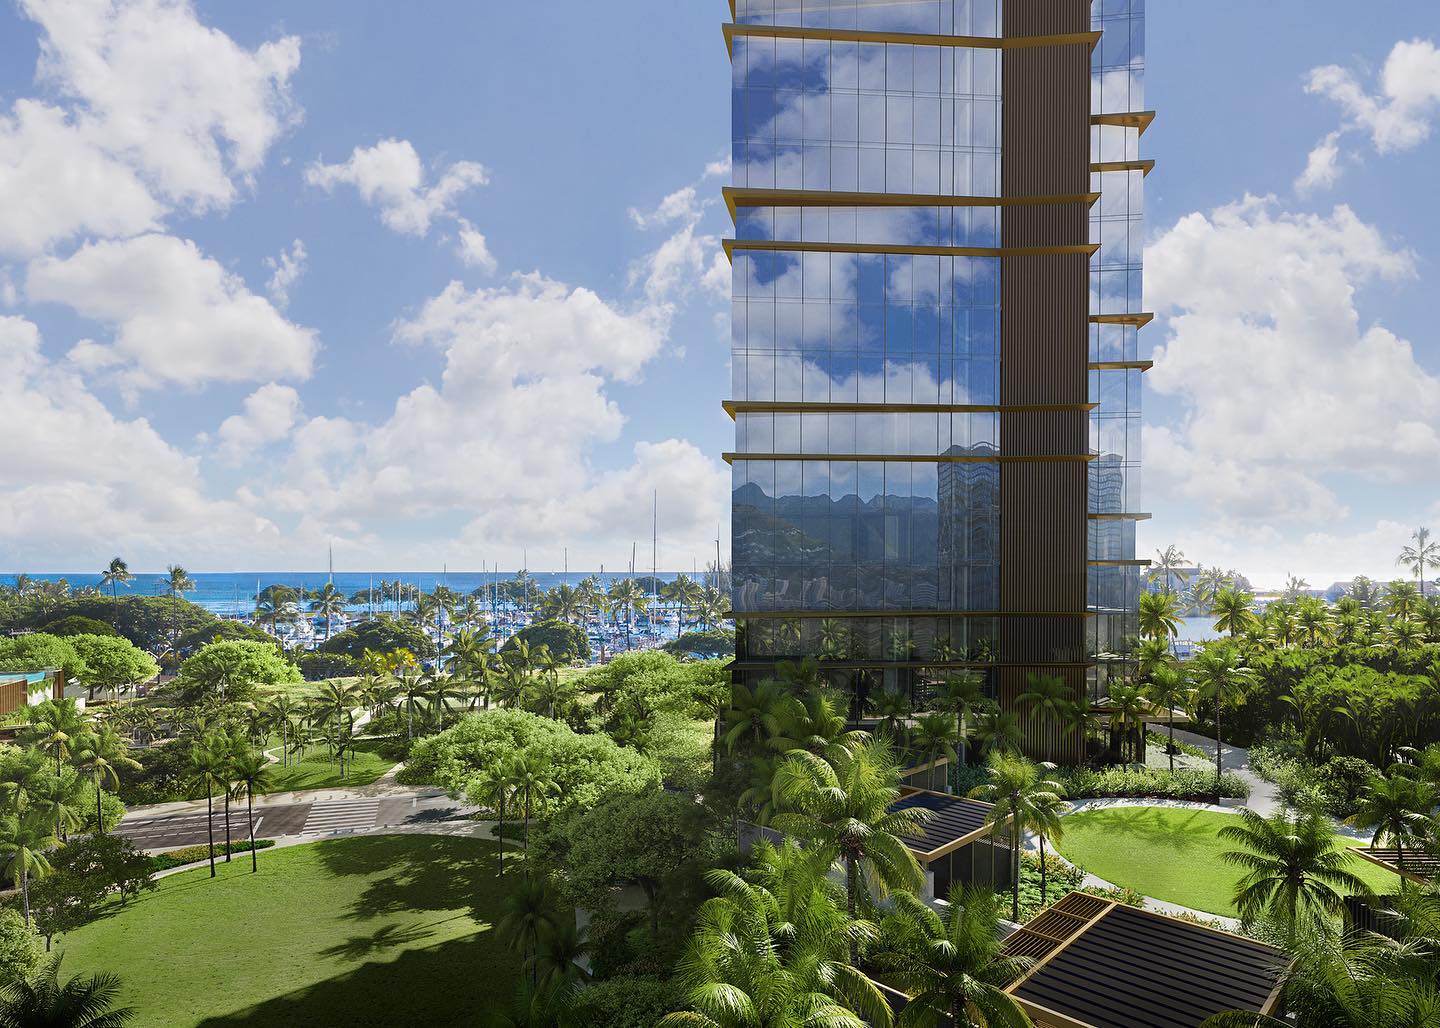 We are excited to share that 316 Ward Village condominium residences were contracted to sell in Q3 – 61 at ‘A‘ali‘i, Kō'ula and Victoria Place, three towers recently completed or under construction, and 255 at The Park Ward Village, which launched pre-sales in July and was 64% pre-sold as of Oct. 29. ‘A‘ali‘i, Kō'ula and Victoria Place are 90.1% sold, and the 61 units sold during the third quarter reflect a 154.2% increase compared to the same period last year.  Read the full report in Pacific Business News at the link in our bio!